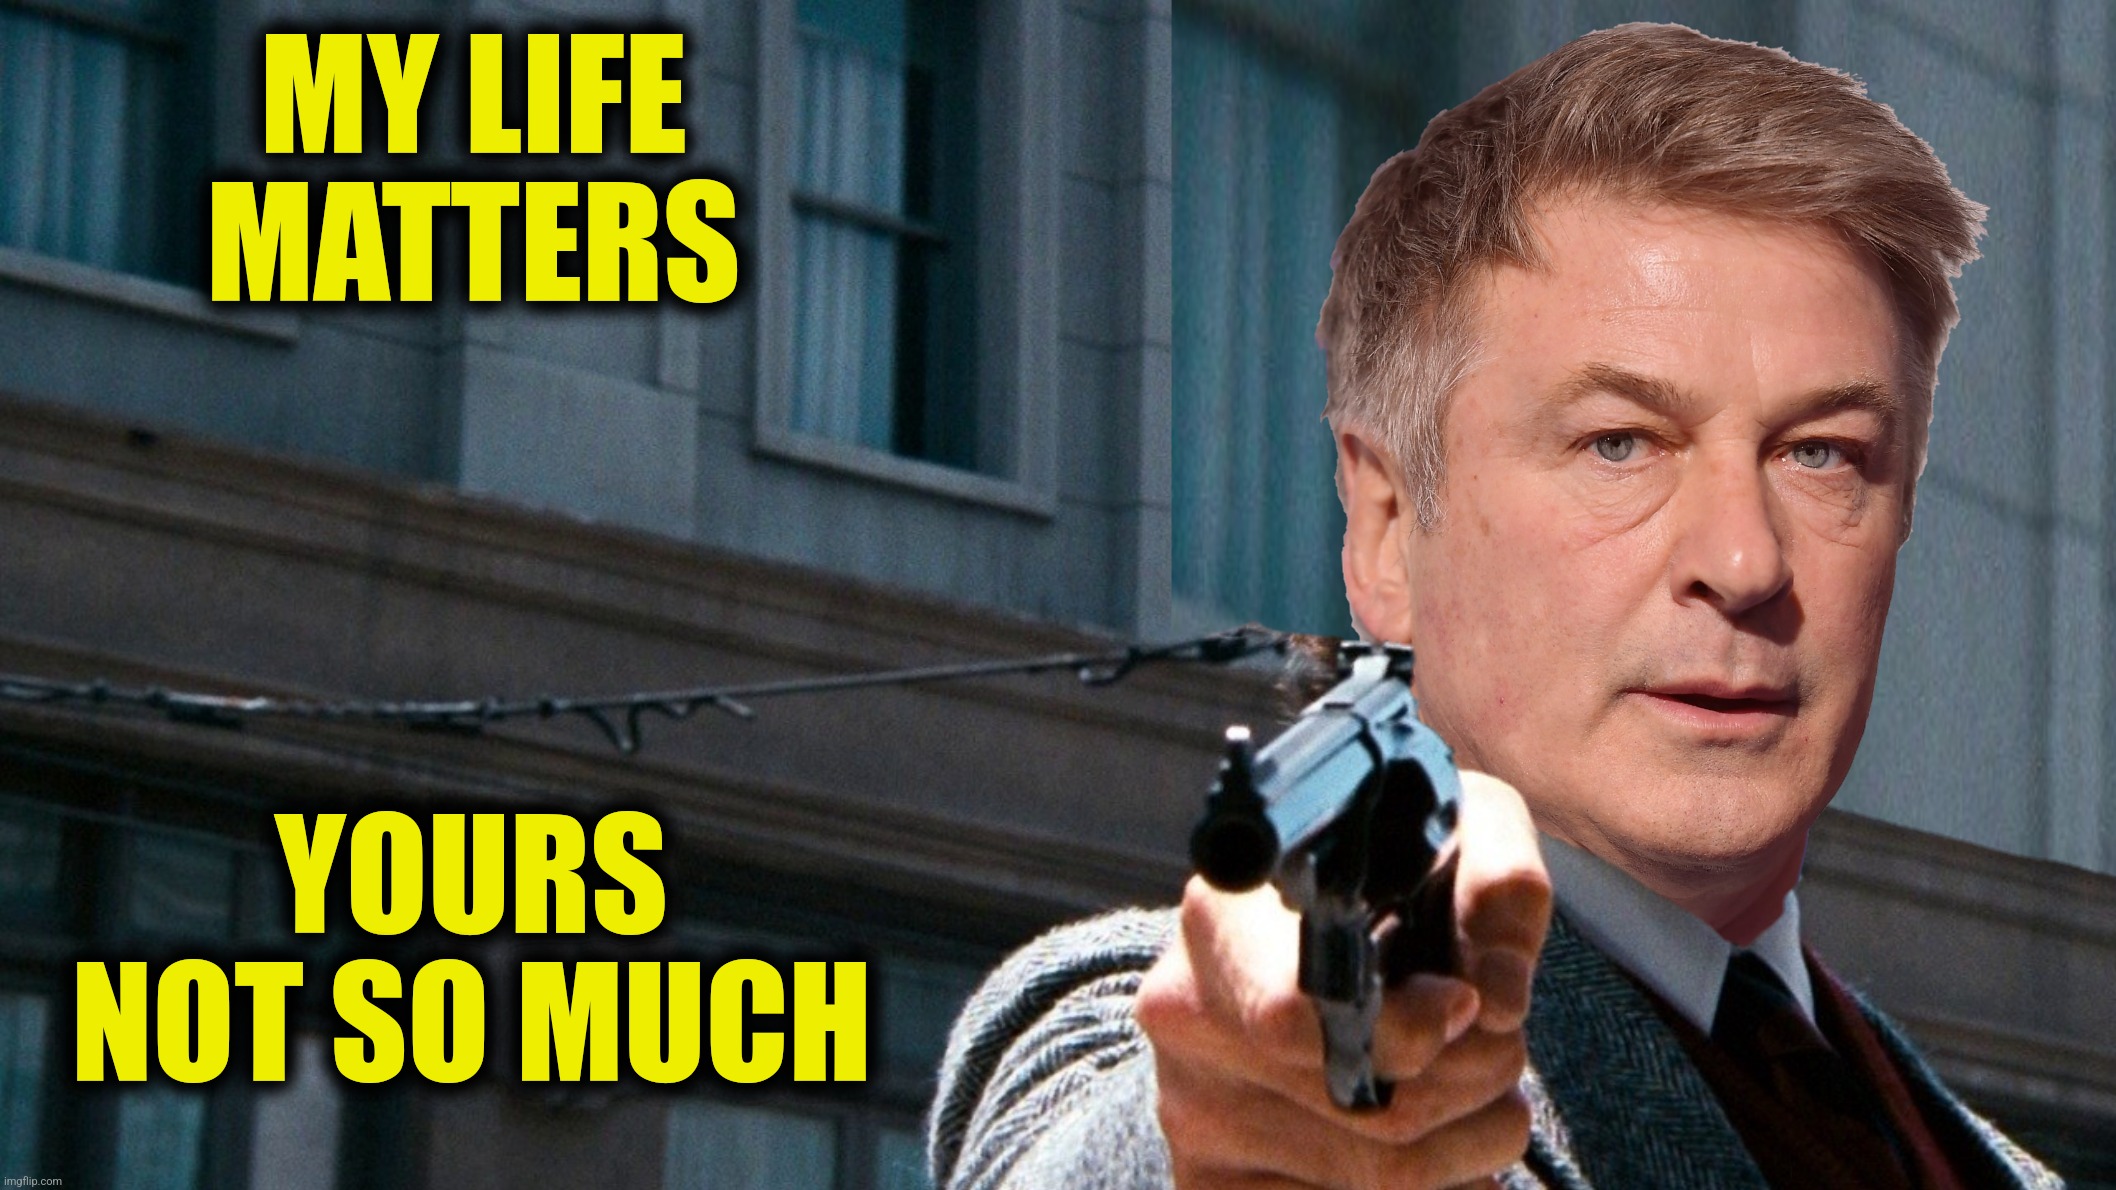 MY LIFE MATTERS YOURS NOT SO MUCH | made w/ Imgflip meme maker